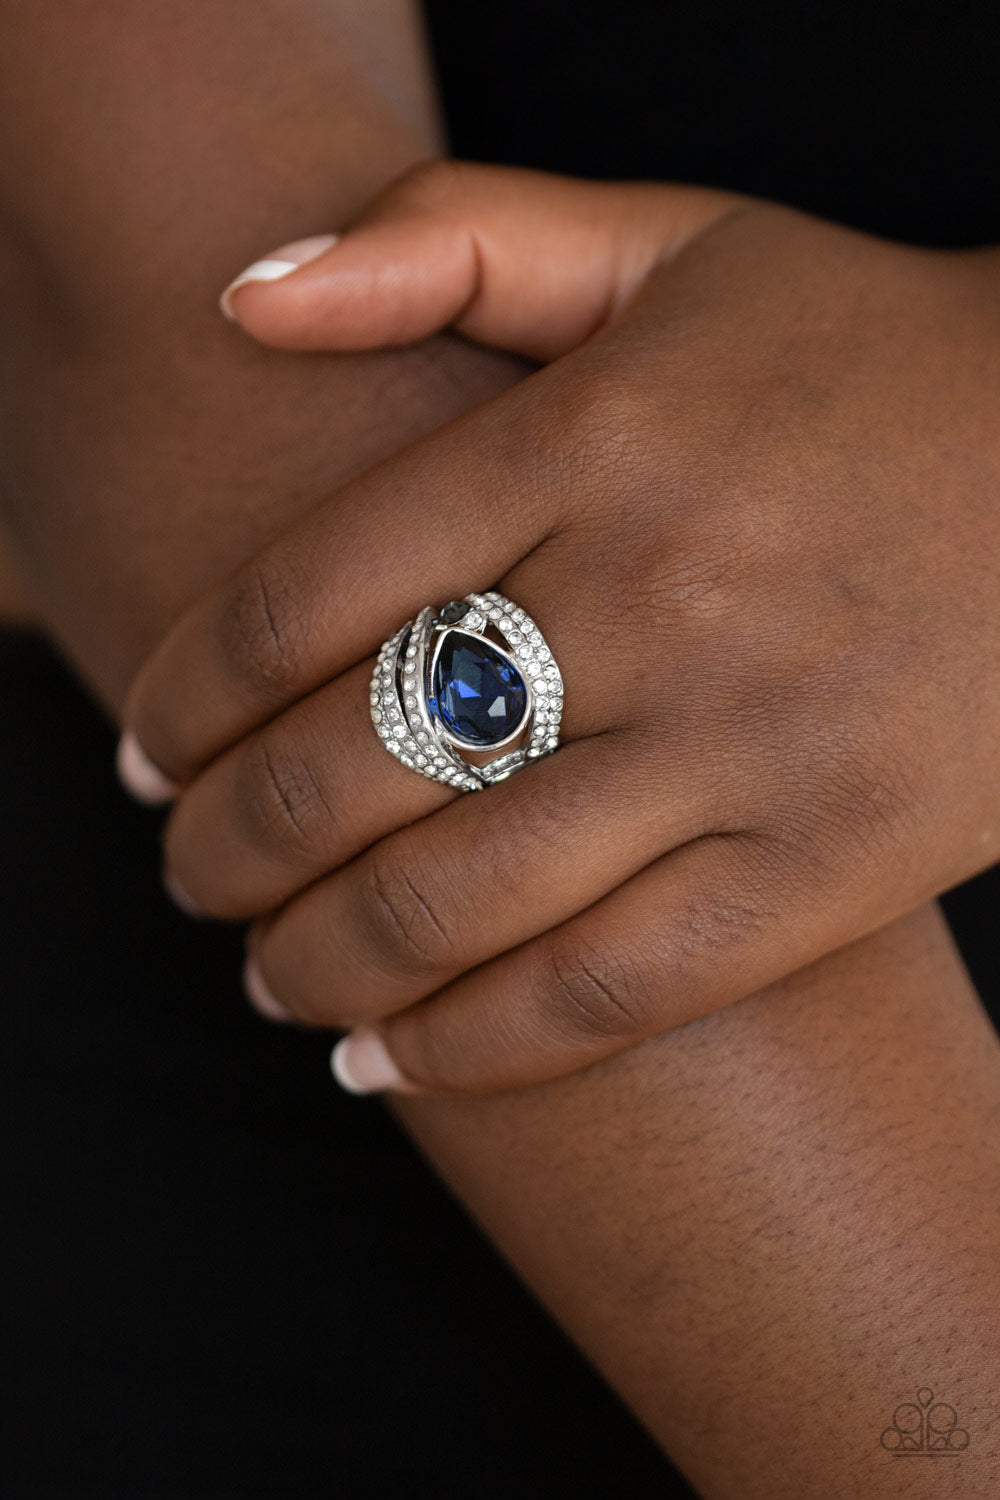 Stepping Up The Glam - Blue Ring - Princess Glam Shop